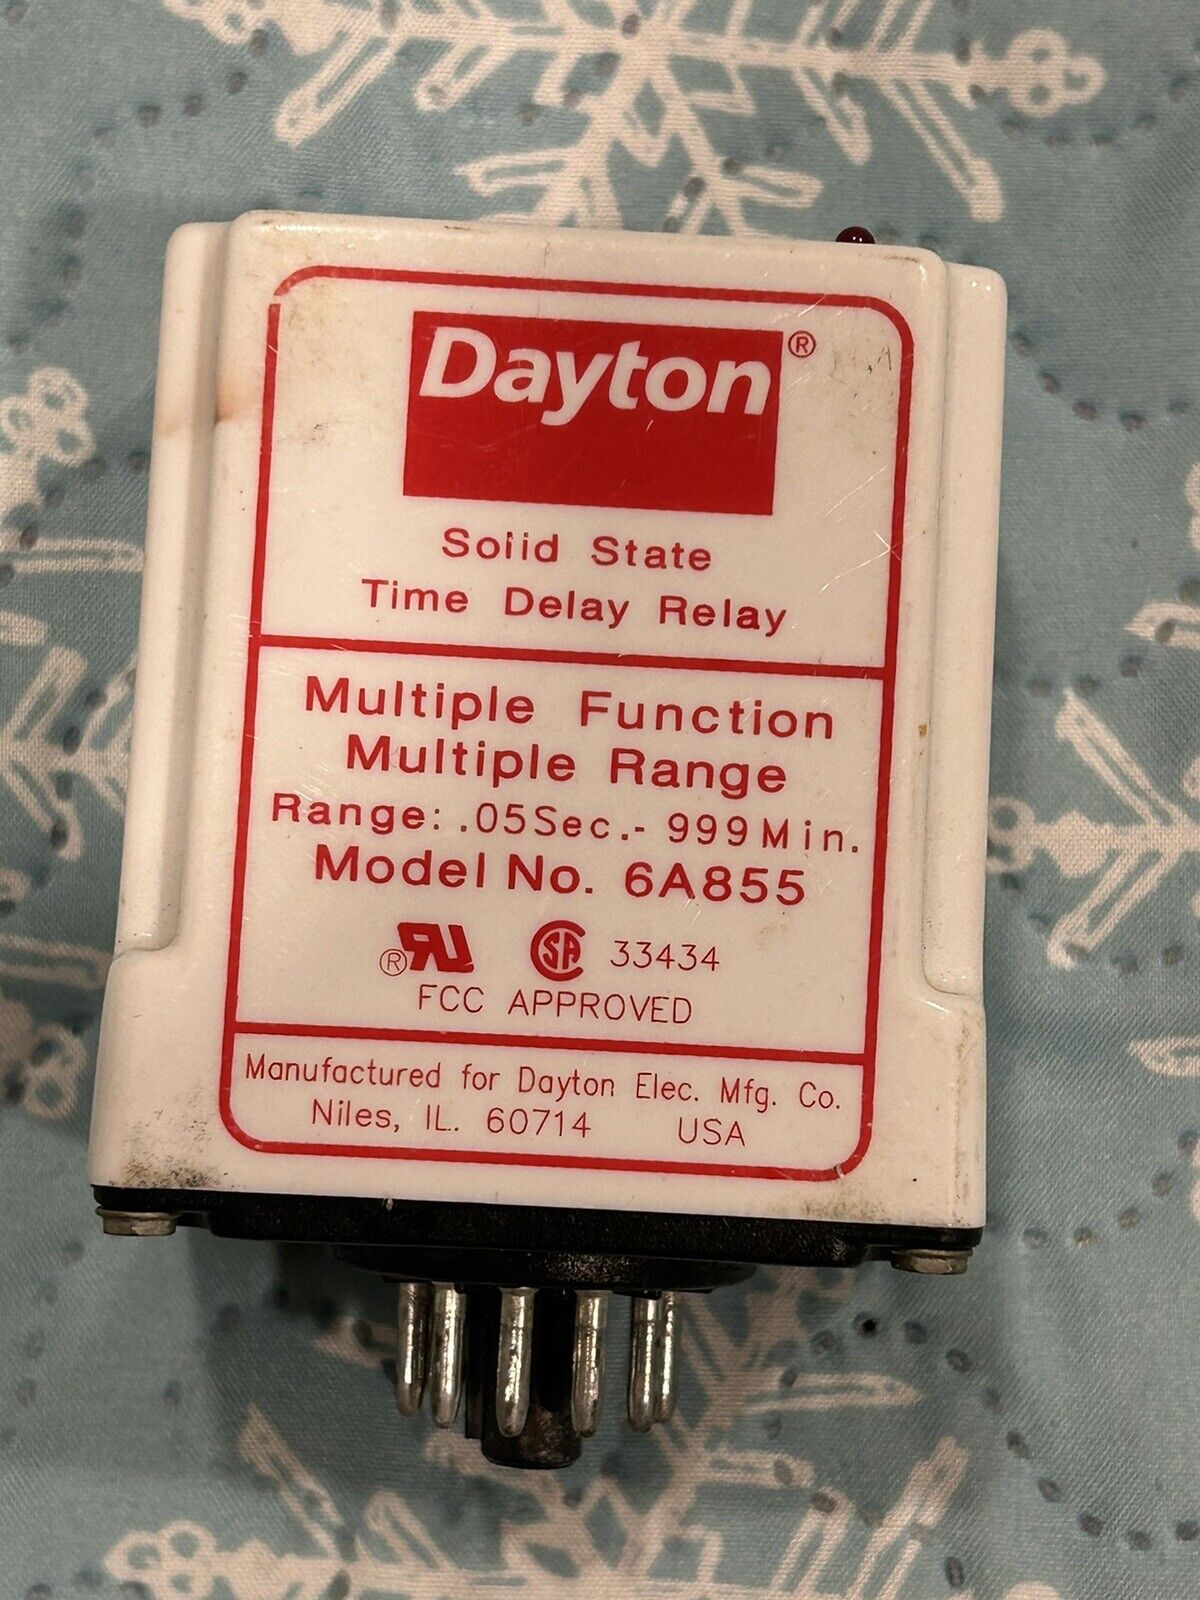 DAYTON 6A854 SOLID STATE TIME DELAY RELAY RANGE .05 SEC - 999 MIN 50/60 HZ 10 A